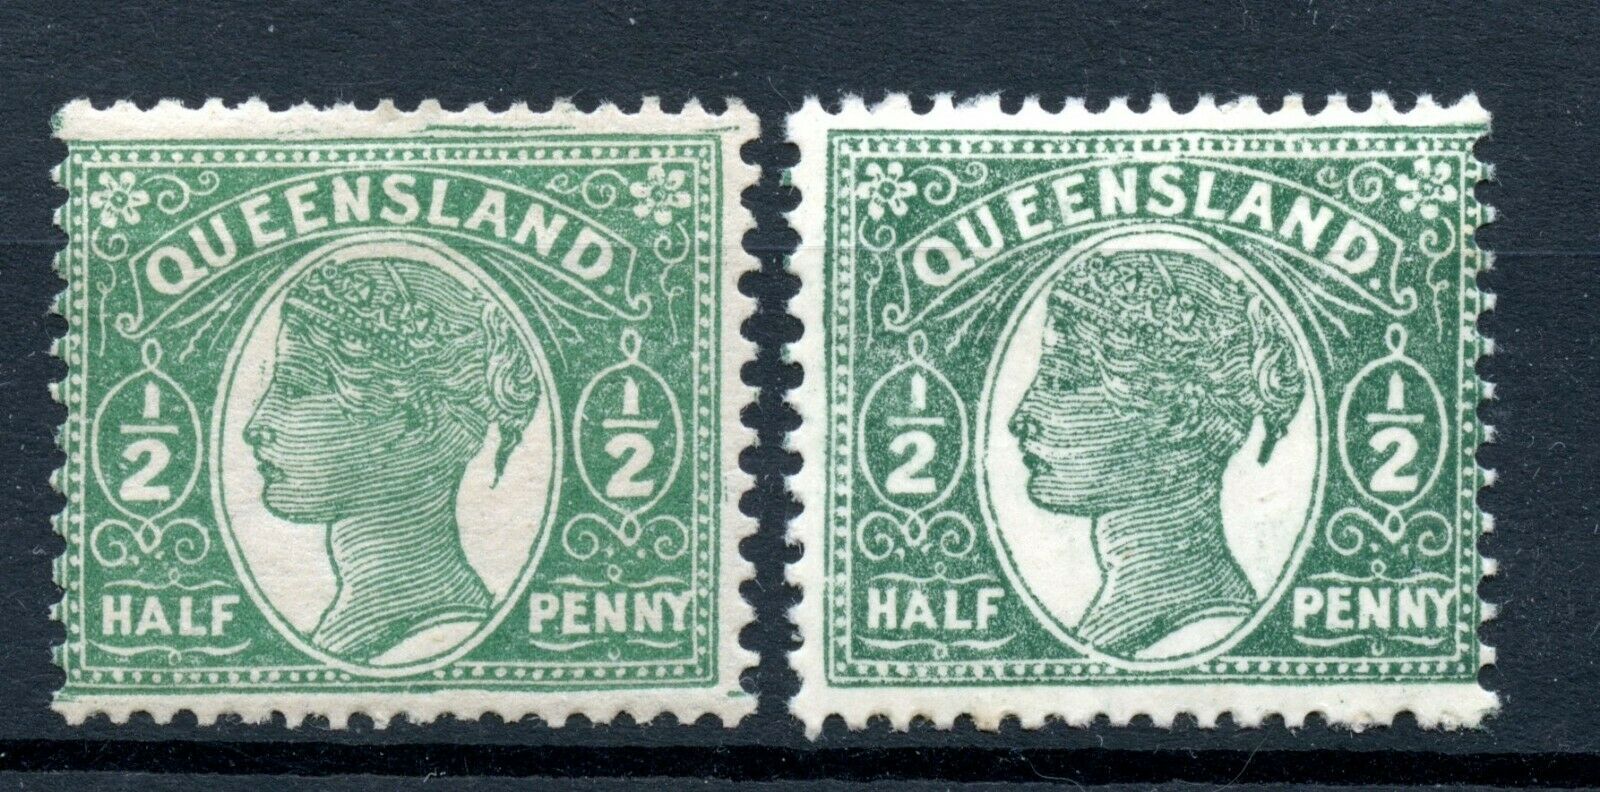 Weeda Australia - Queensland 101, 101a Mint Hinged, With & Without Moire Cv $88+